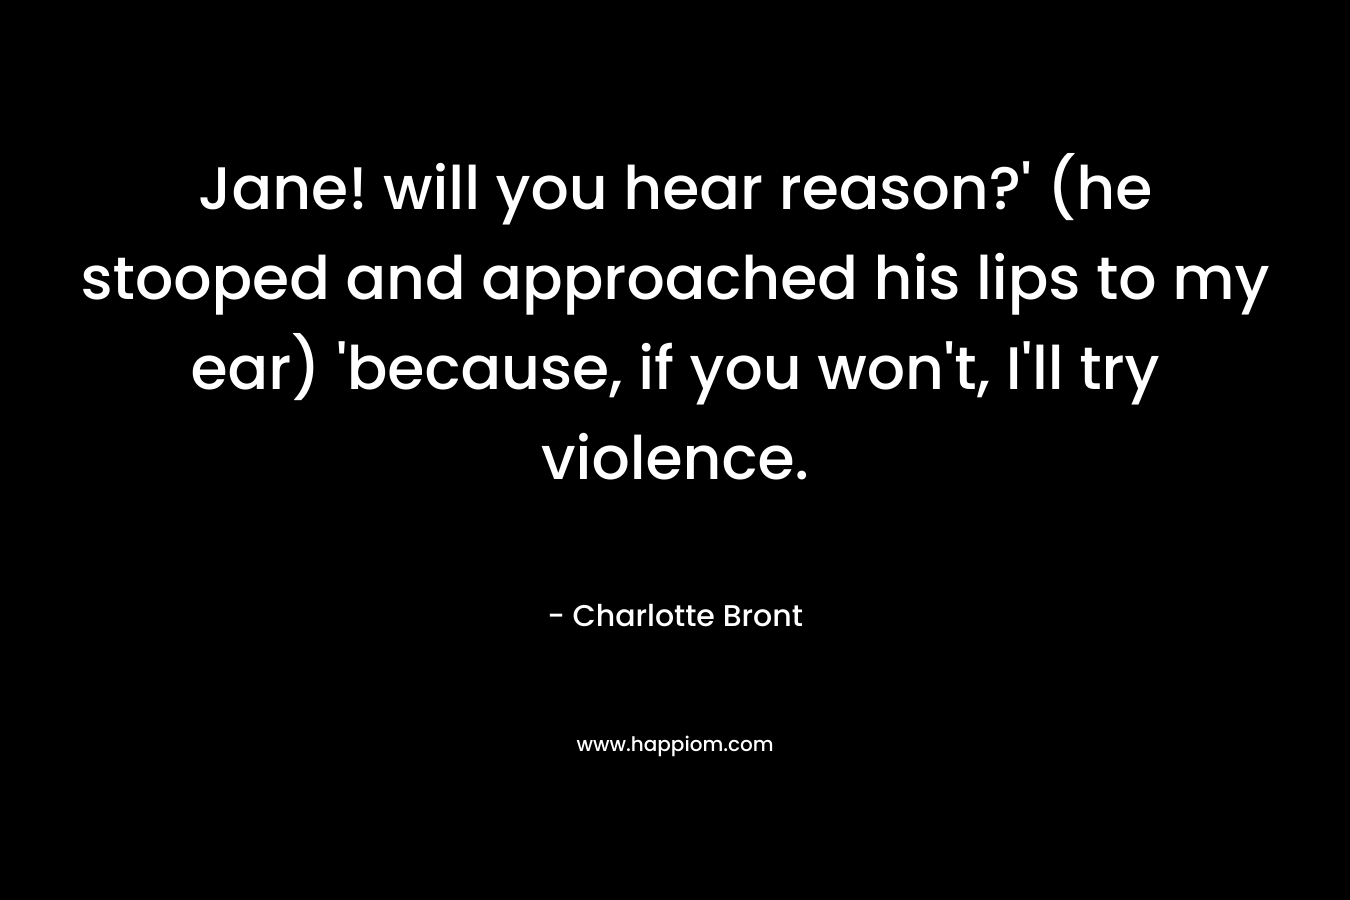 Jane! will you hear reason?’ (he stooped and approached his lips to my ear) ‘because, if you won’t, I’ll try violence. – Charlotte Bront